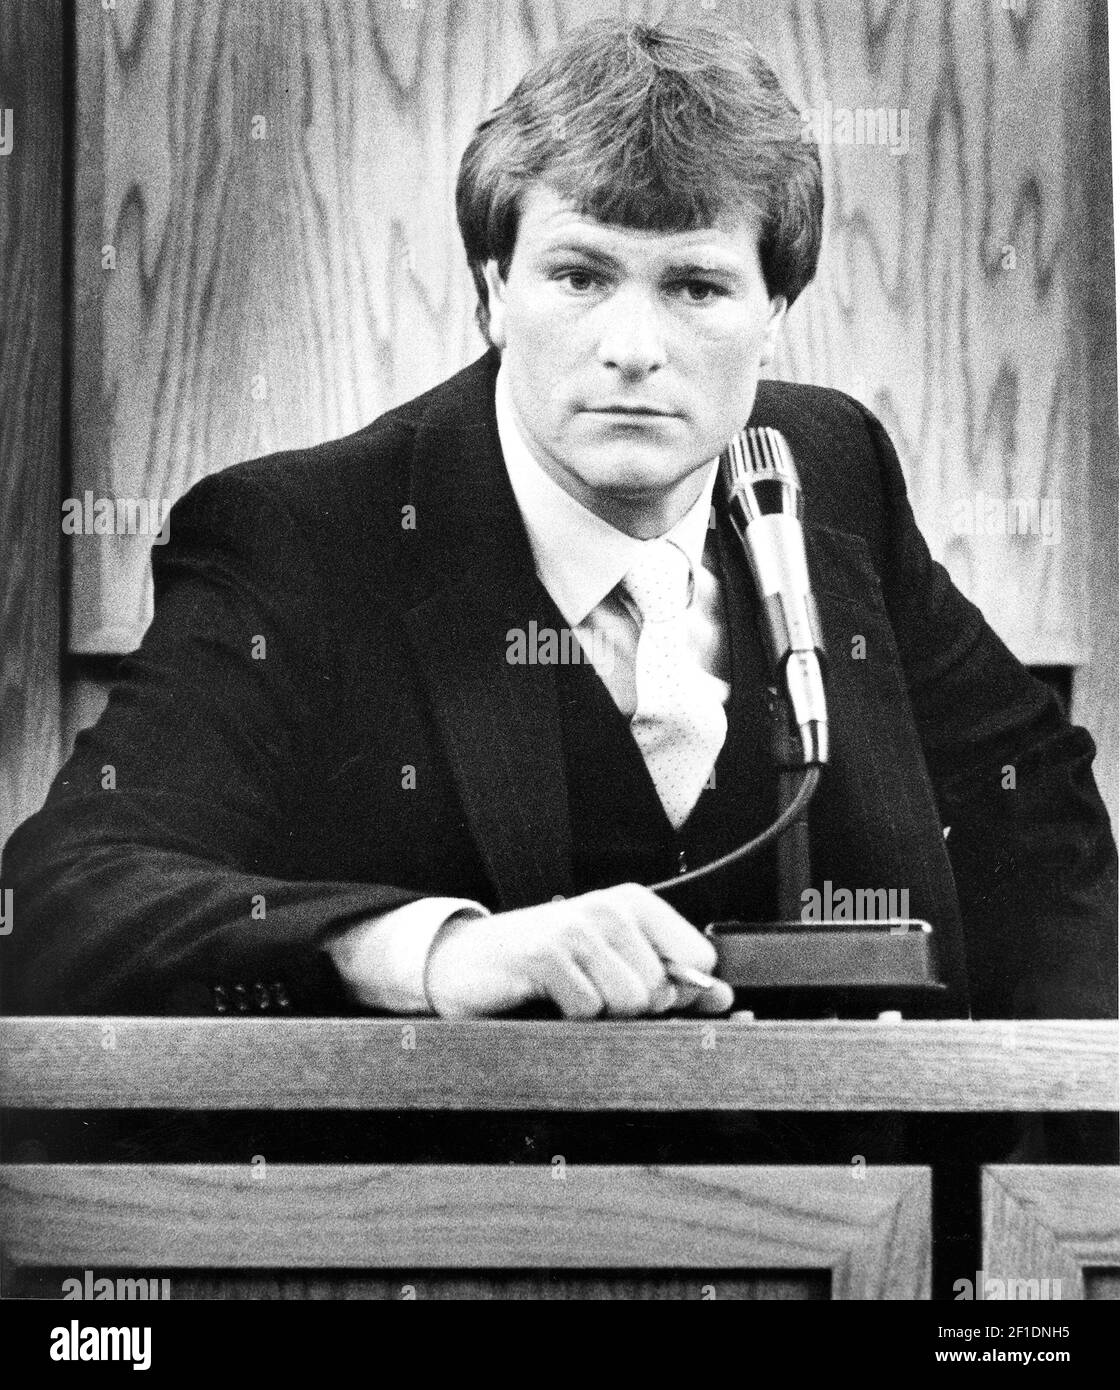 ** FILE **Kevin Coe is seen in this 1981 file photo testifying during his rape trial in Spokane, Wash. Washington state on Wednesday, Aug. 30, 2006, took the first steps to keep Coe, convicted in the notorious 'South Hill Rapist' case, in custody even as he completes his prison sentence. Attorney General Rob McKenna filed court documents requesting a hearing in Spokane County that could determine whether Coe should be sent to the state's civil commitment facility for violent sexual predators on McNeil Island, southwest of Tacoma. (Photo by The Spokesman-Review) *** Please Use Credit from Credi Stock Photo